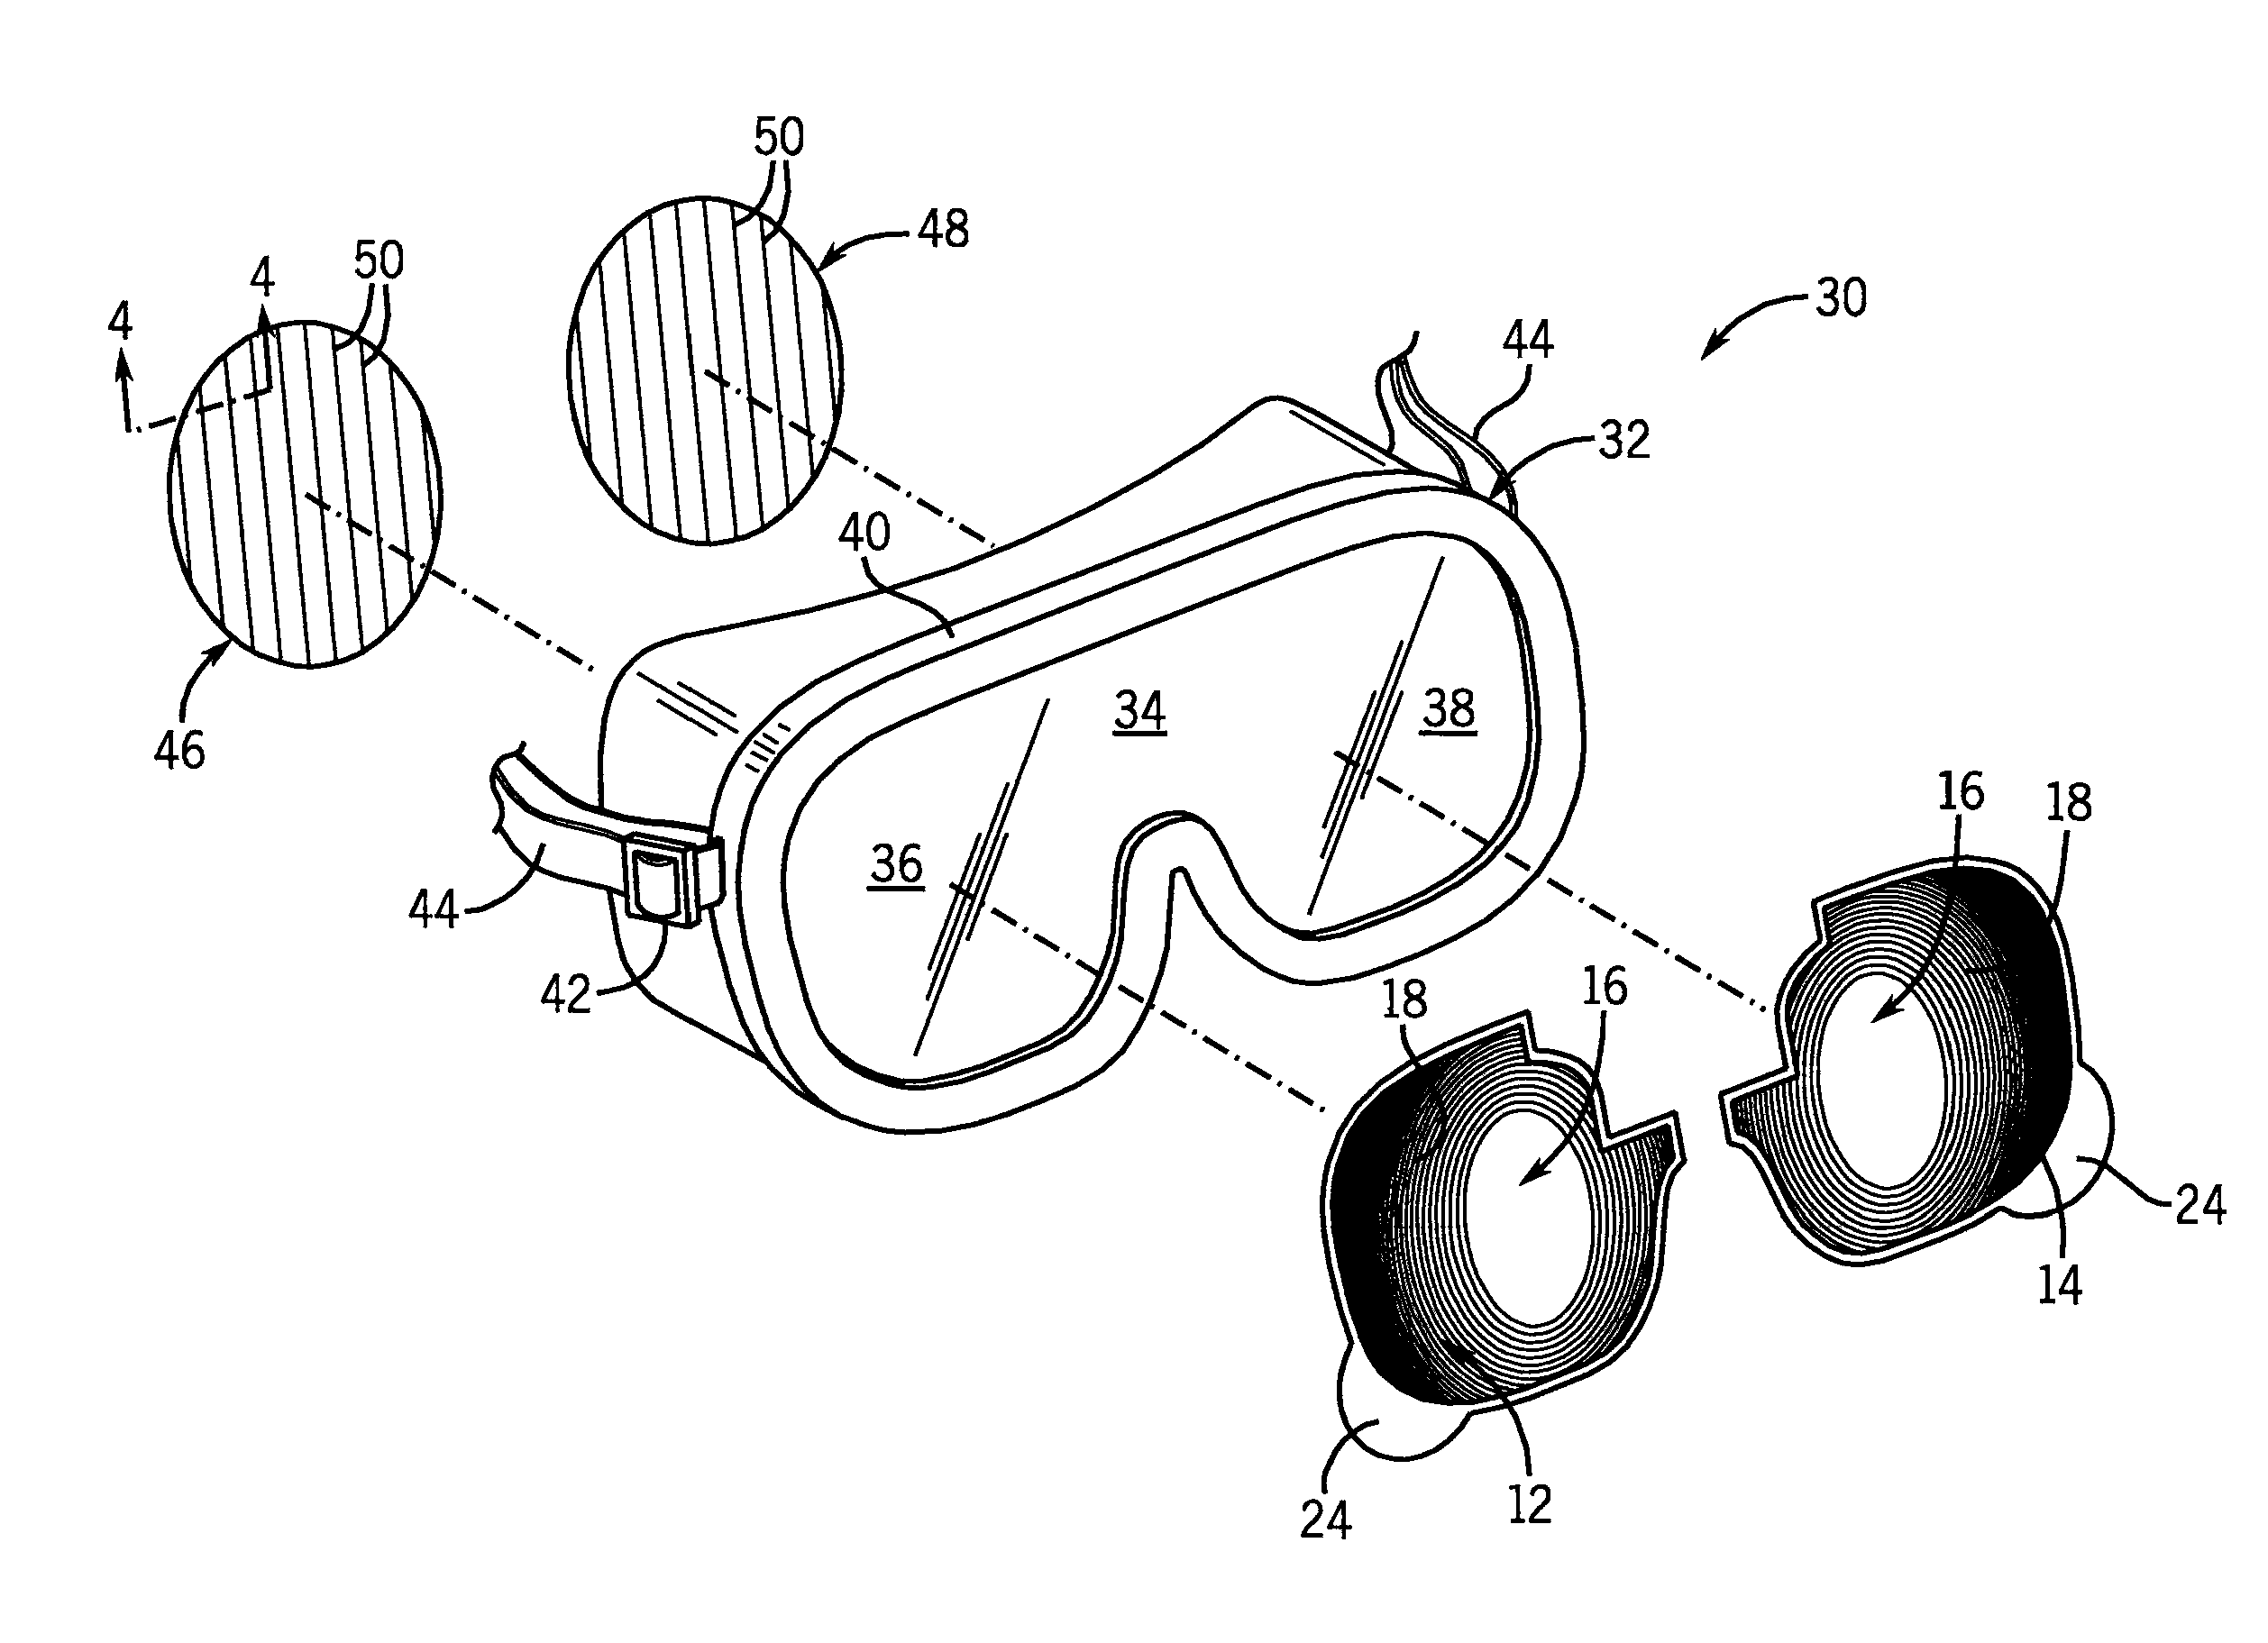 Viewing device for simulating impairment and reducing peripheral vision